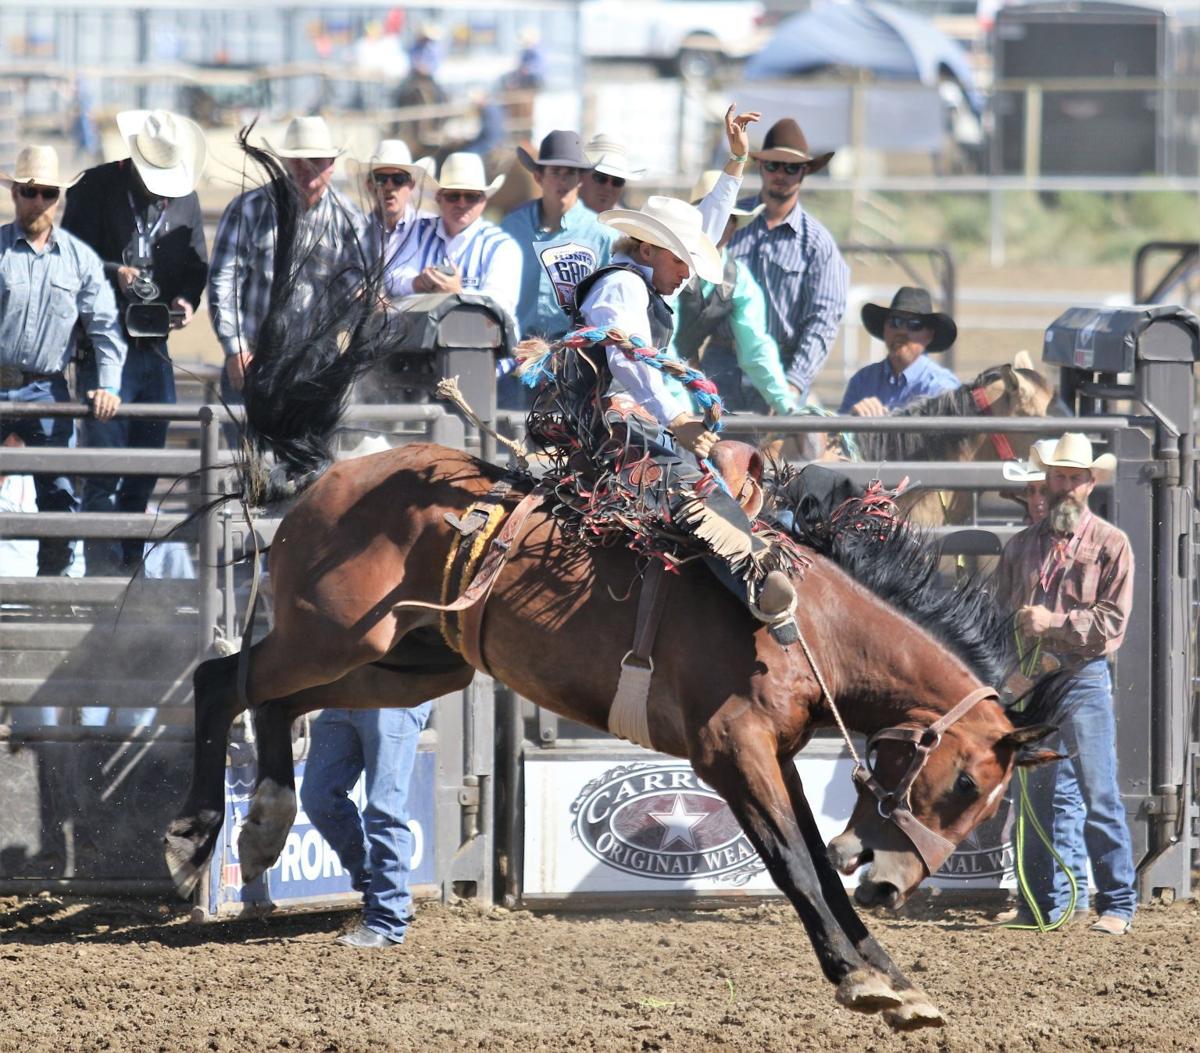 National High School Rodeo Finals results as of Friday afternoon